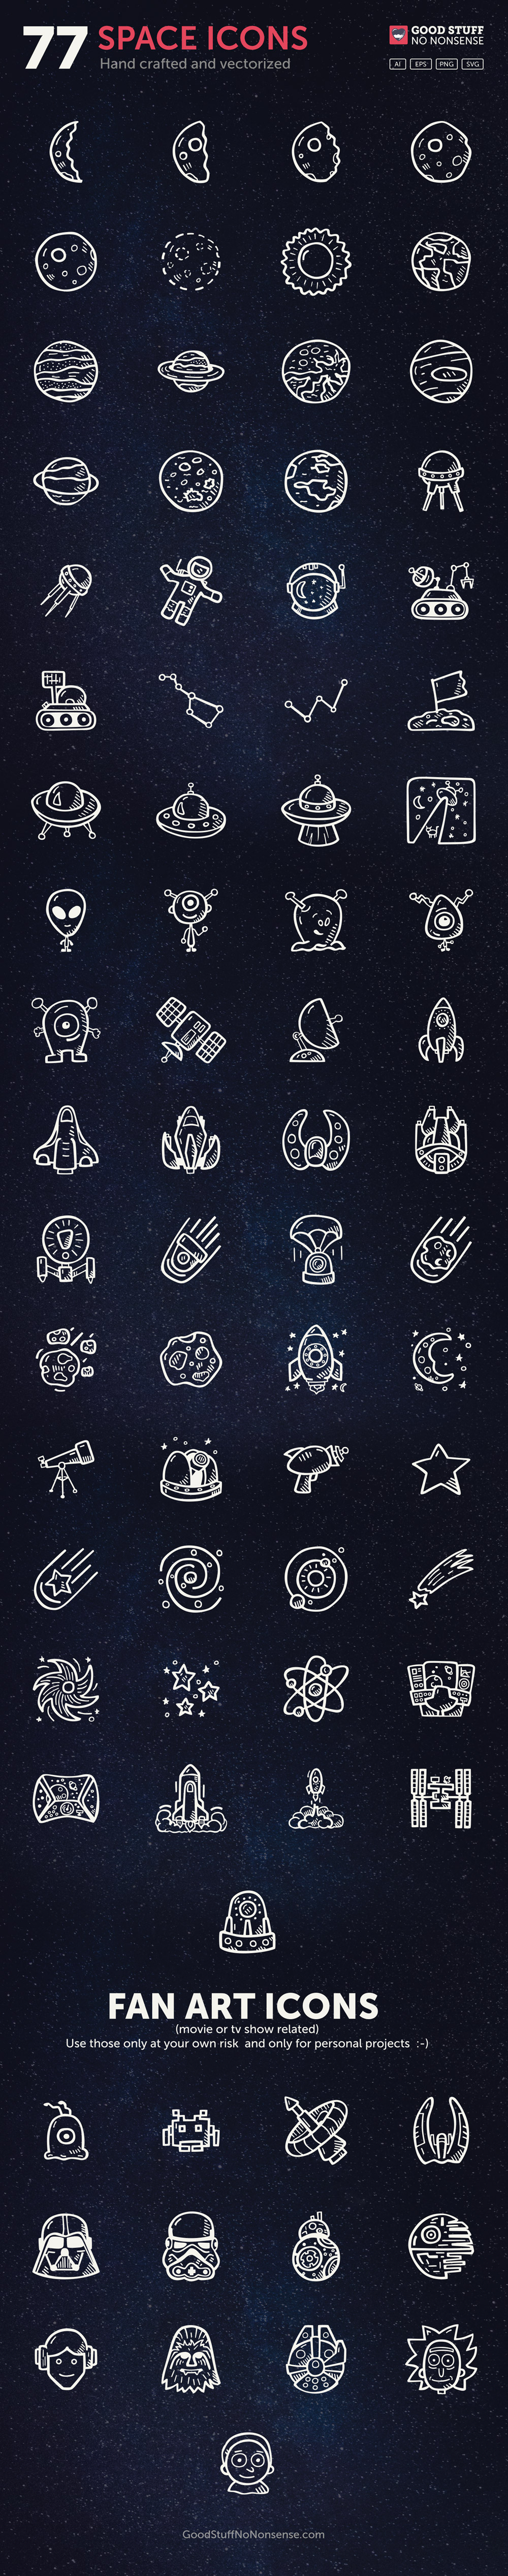 space-icons-hand-drawn-icons-basic-full